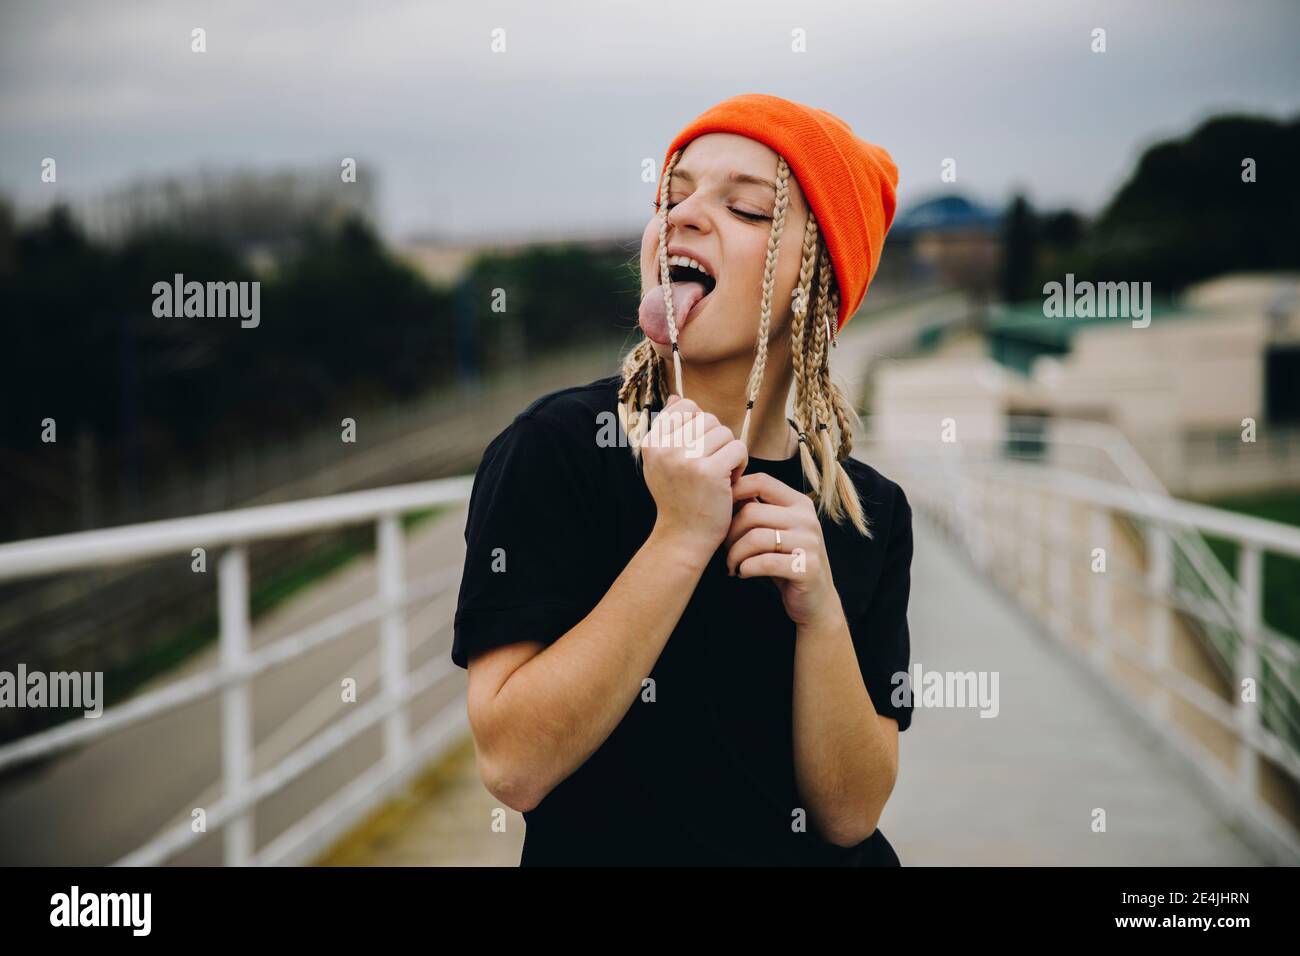 Young woman licking braided hair while standing on footbridge Stock Photo